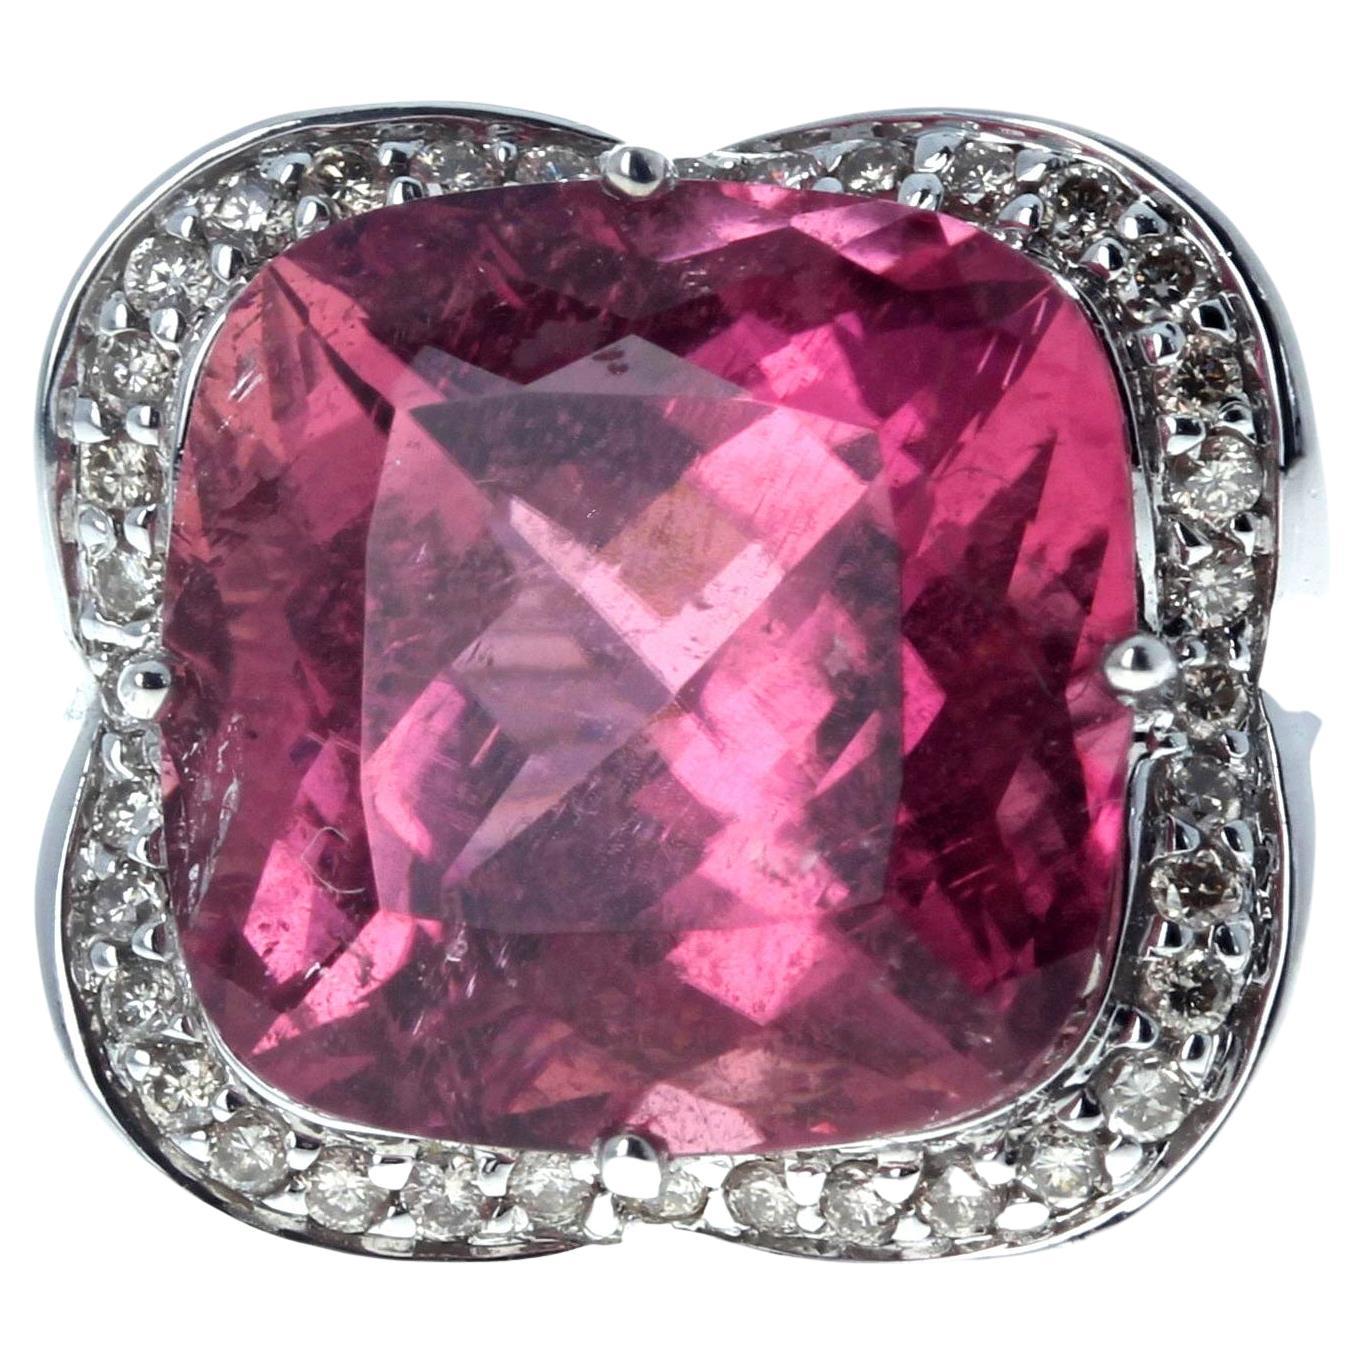 This brilliant beautiful 11.46 carat Tourmaline is 13mm x 13mm set in a white gold ring size 7.  The Tourmaline is enhanced by tiny little sparkling real white Diamonds set all the way around it.  This is sizable for free.  It is clear, sparkling,